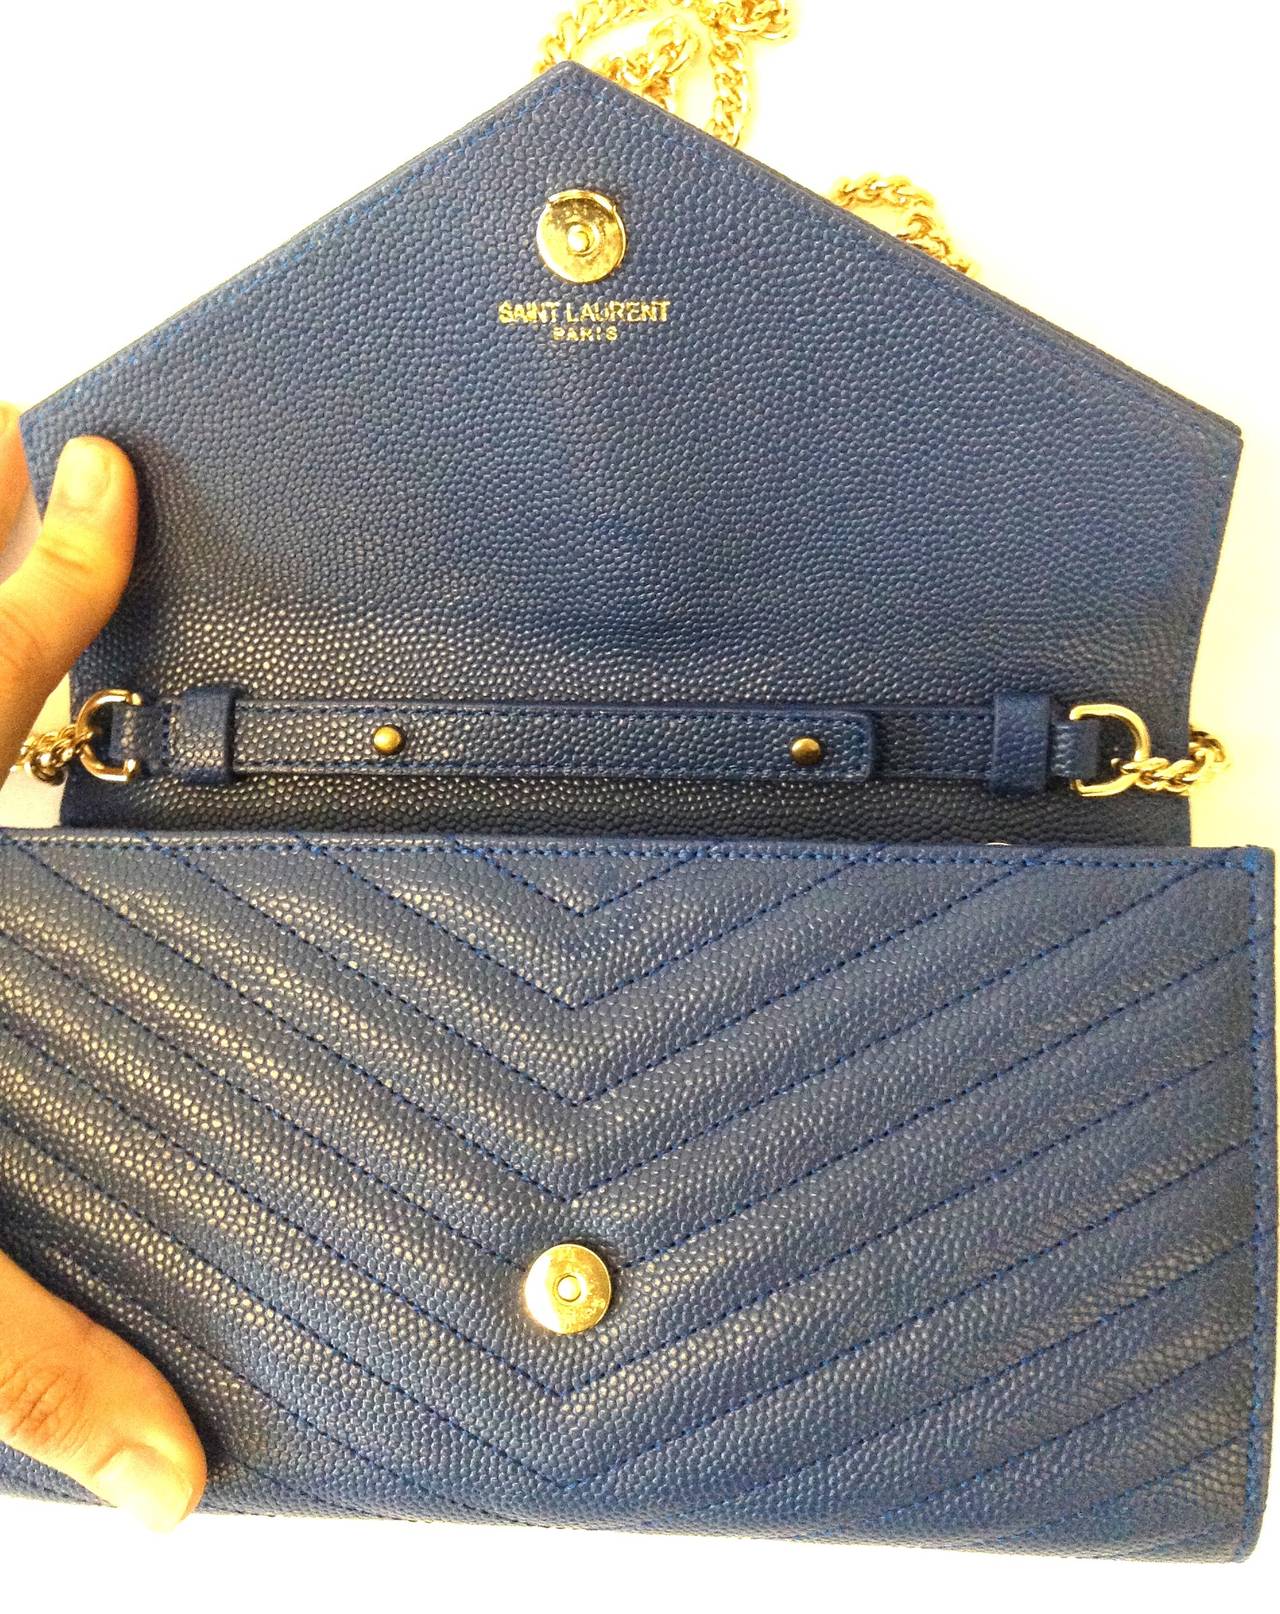 Authentic stunning 2013 YSL Convertible clutch 

Made in italy 

Season collection fall 2013 

Comes with dust bag - price tag - Authentication from Archive Authentications 

22 inch chain strap - can we worn cross body or removable strap -